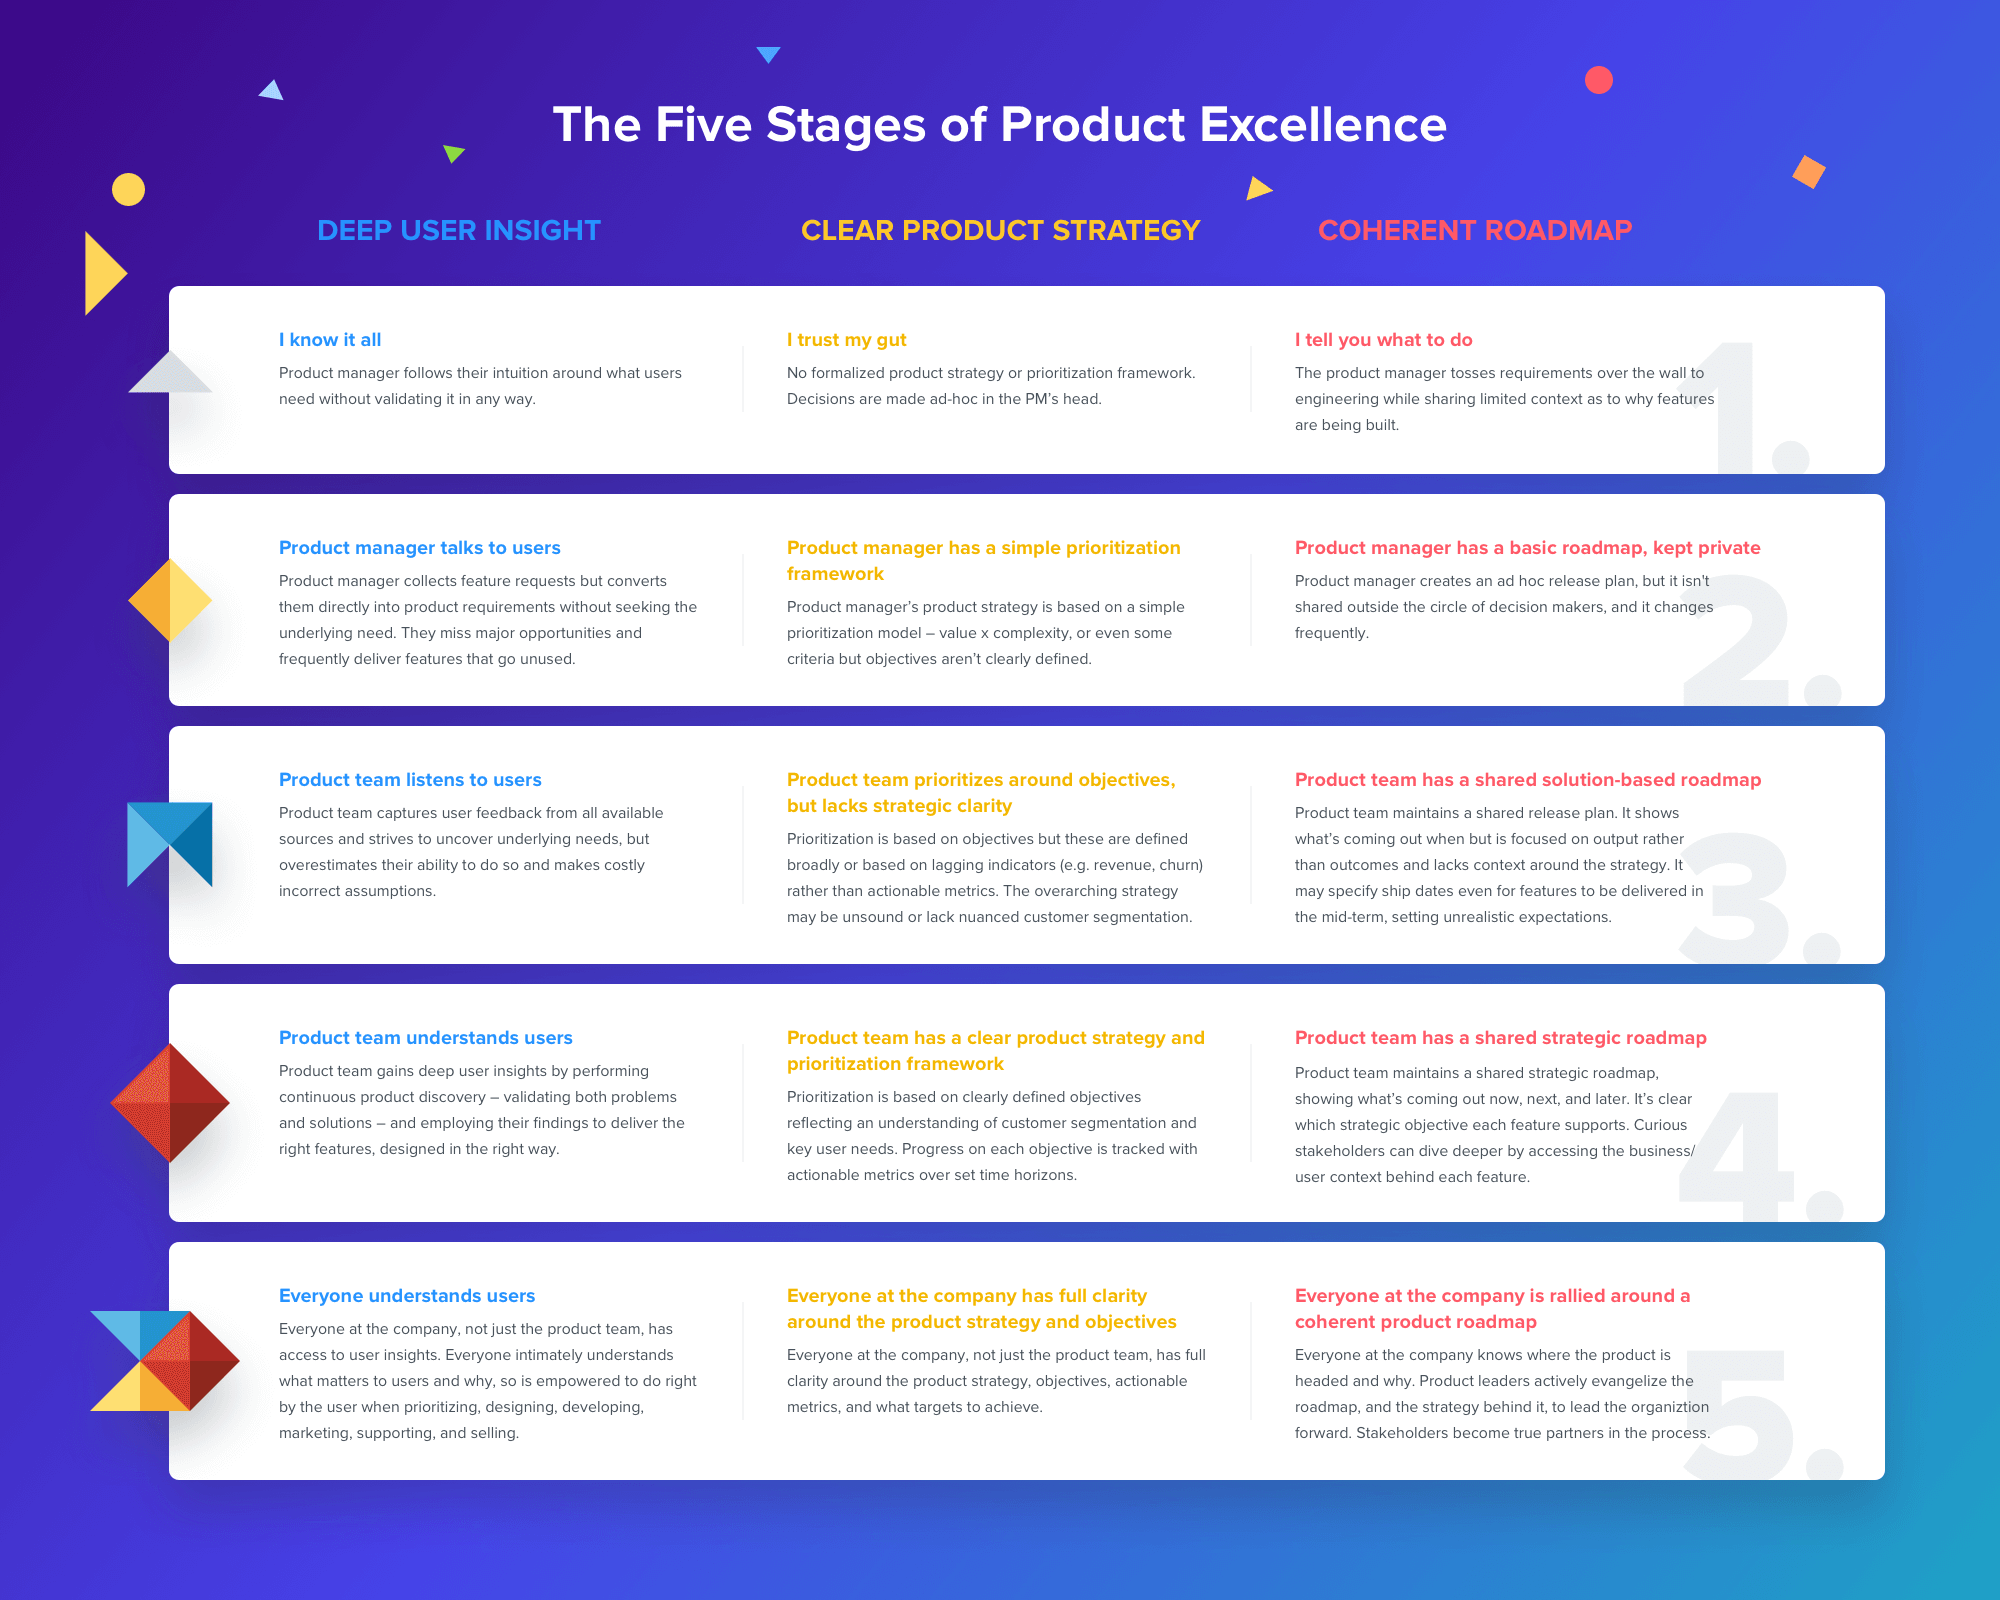 The Five Stages of Product Excellence